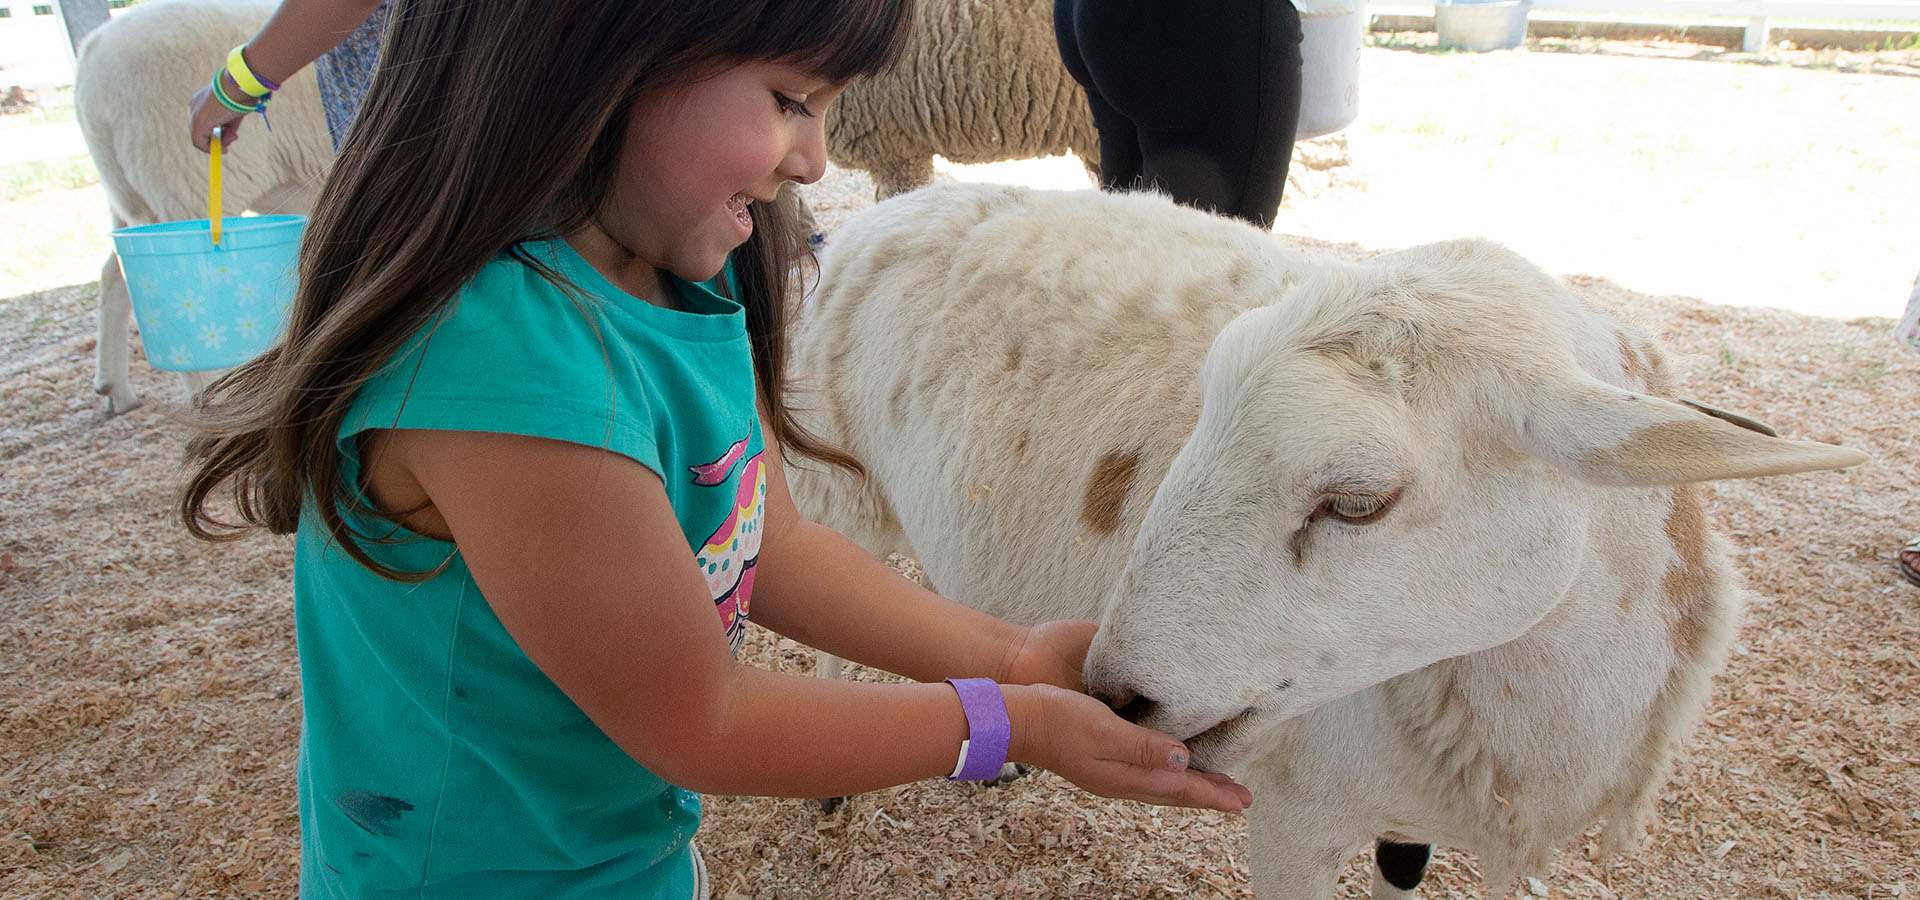 Illustration announcing petting farm event on Saturday, 10 a.m. to 1 p.m.